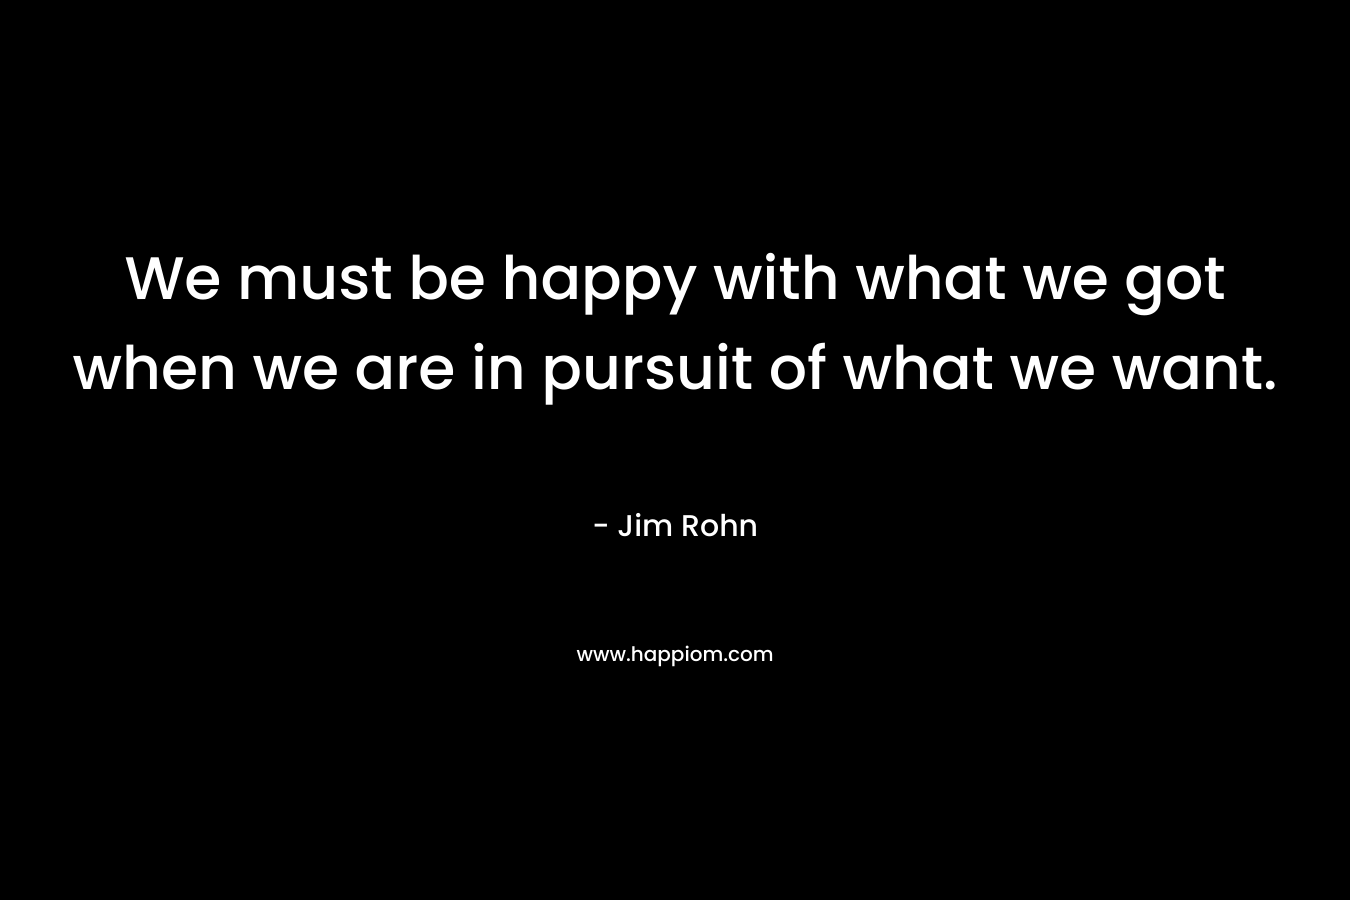 We must be happy with what we got when we are in pursuit of what we want. – Jim Rohn